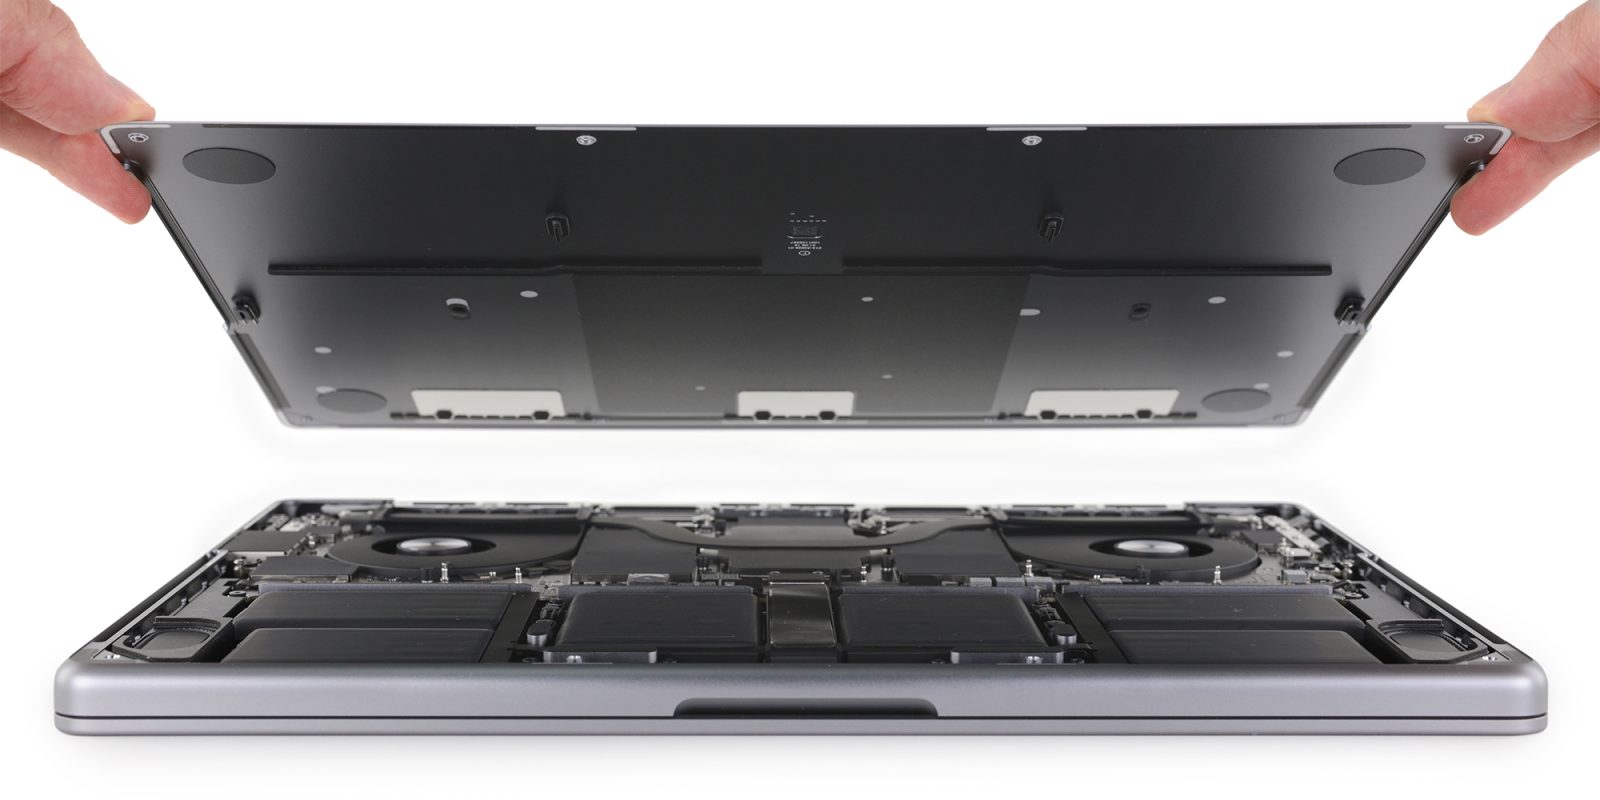 Instrument lærling Gylden iFixit: New MacBook Pro has first 'DIY-friendly' battery replacement design  since 2012 - 9to5Mac